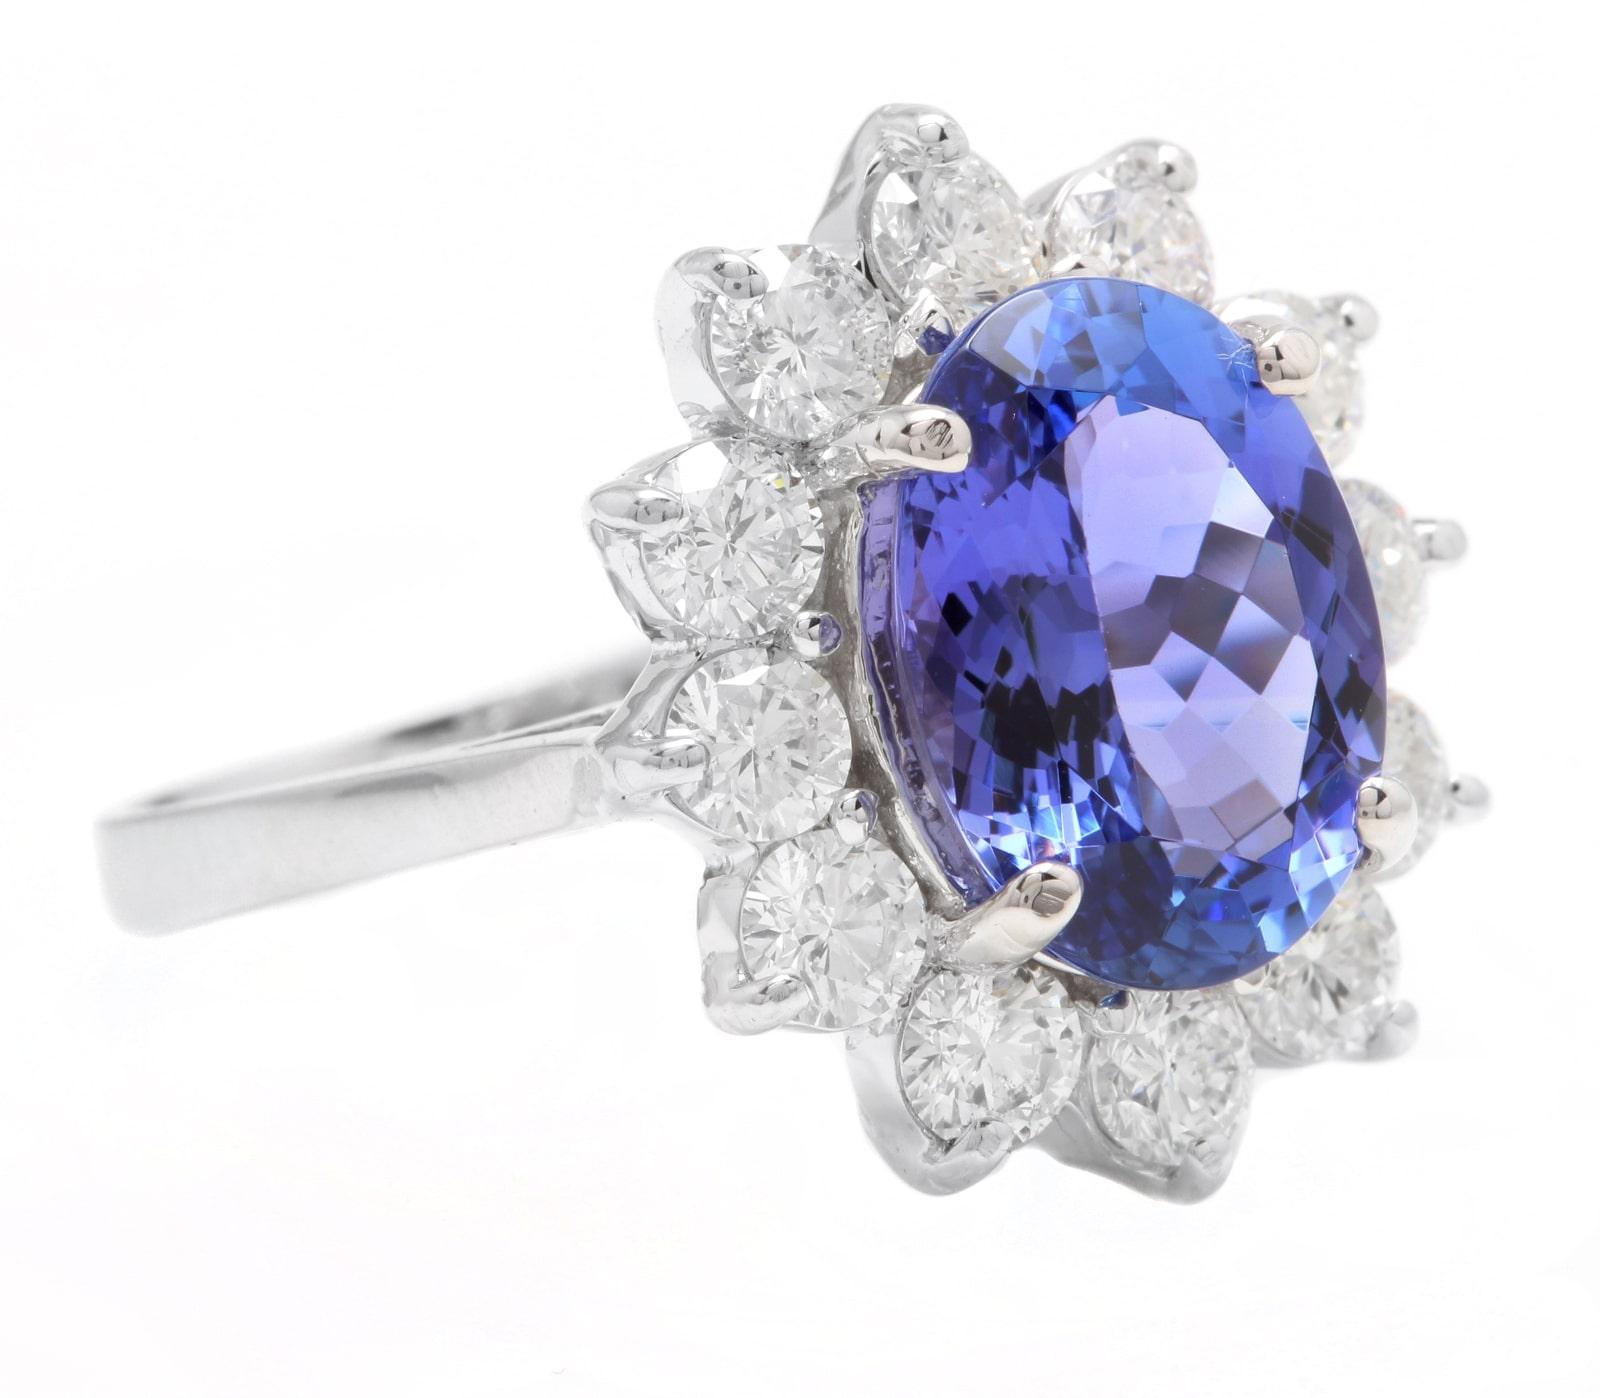 5.75 Carats Natural Very Nice Looking Tanzanite and Diamond 18K Solid White Gold Ring

Suggested Replacement Value:  $7,800.00

Total Natural Oval Cut Tanzanite Weight is: Approx. 4.25 Carats 

Natural Round Diamonds Weight: Approx. 1.50 Carats